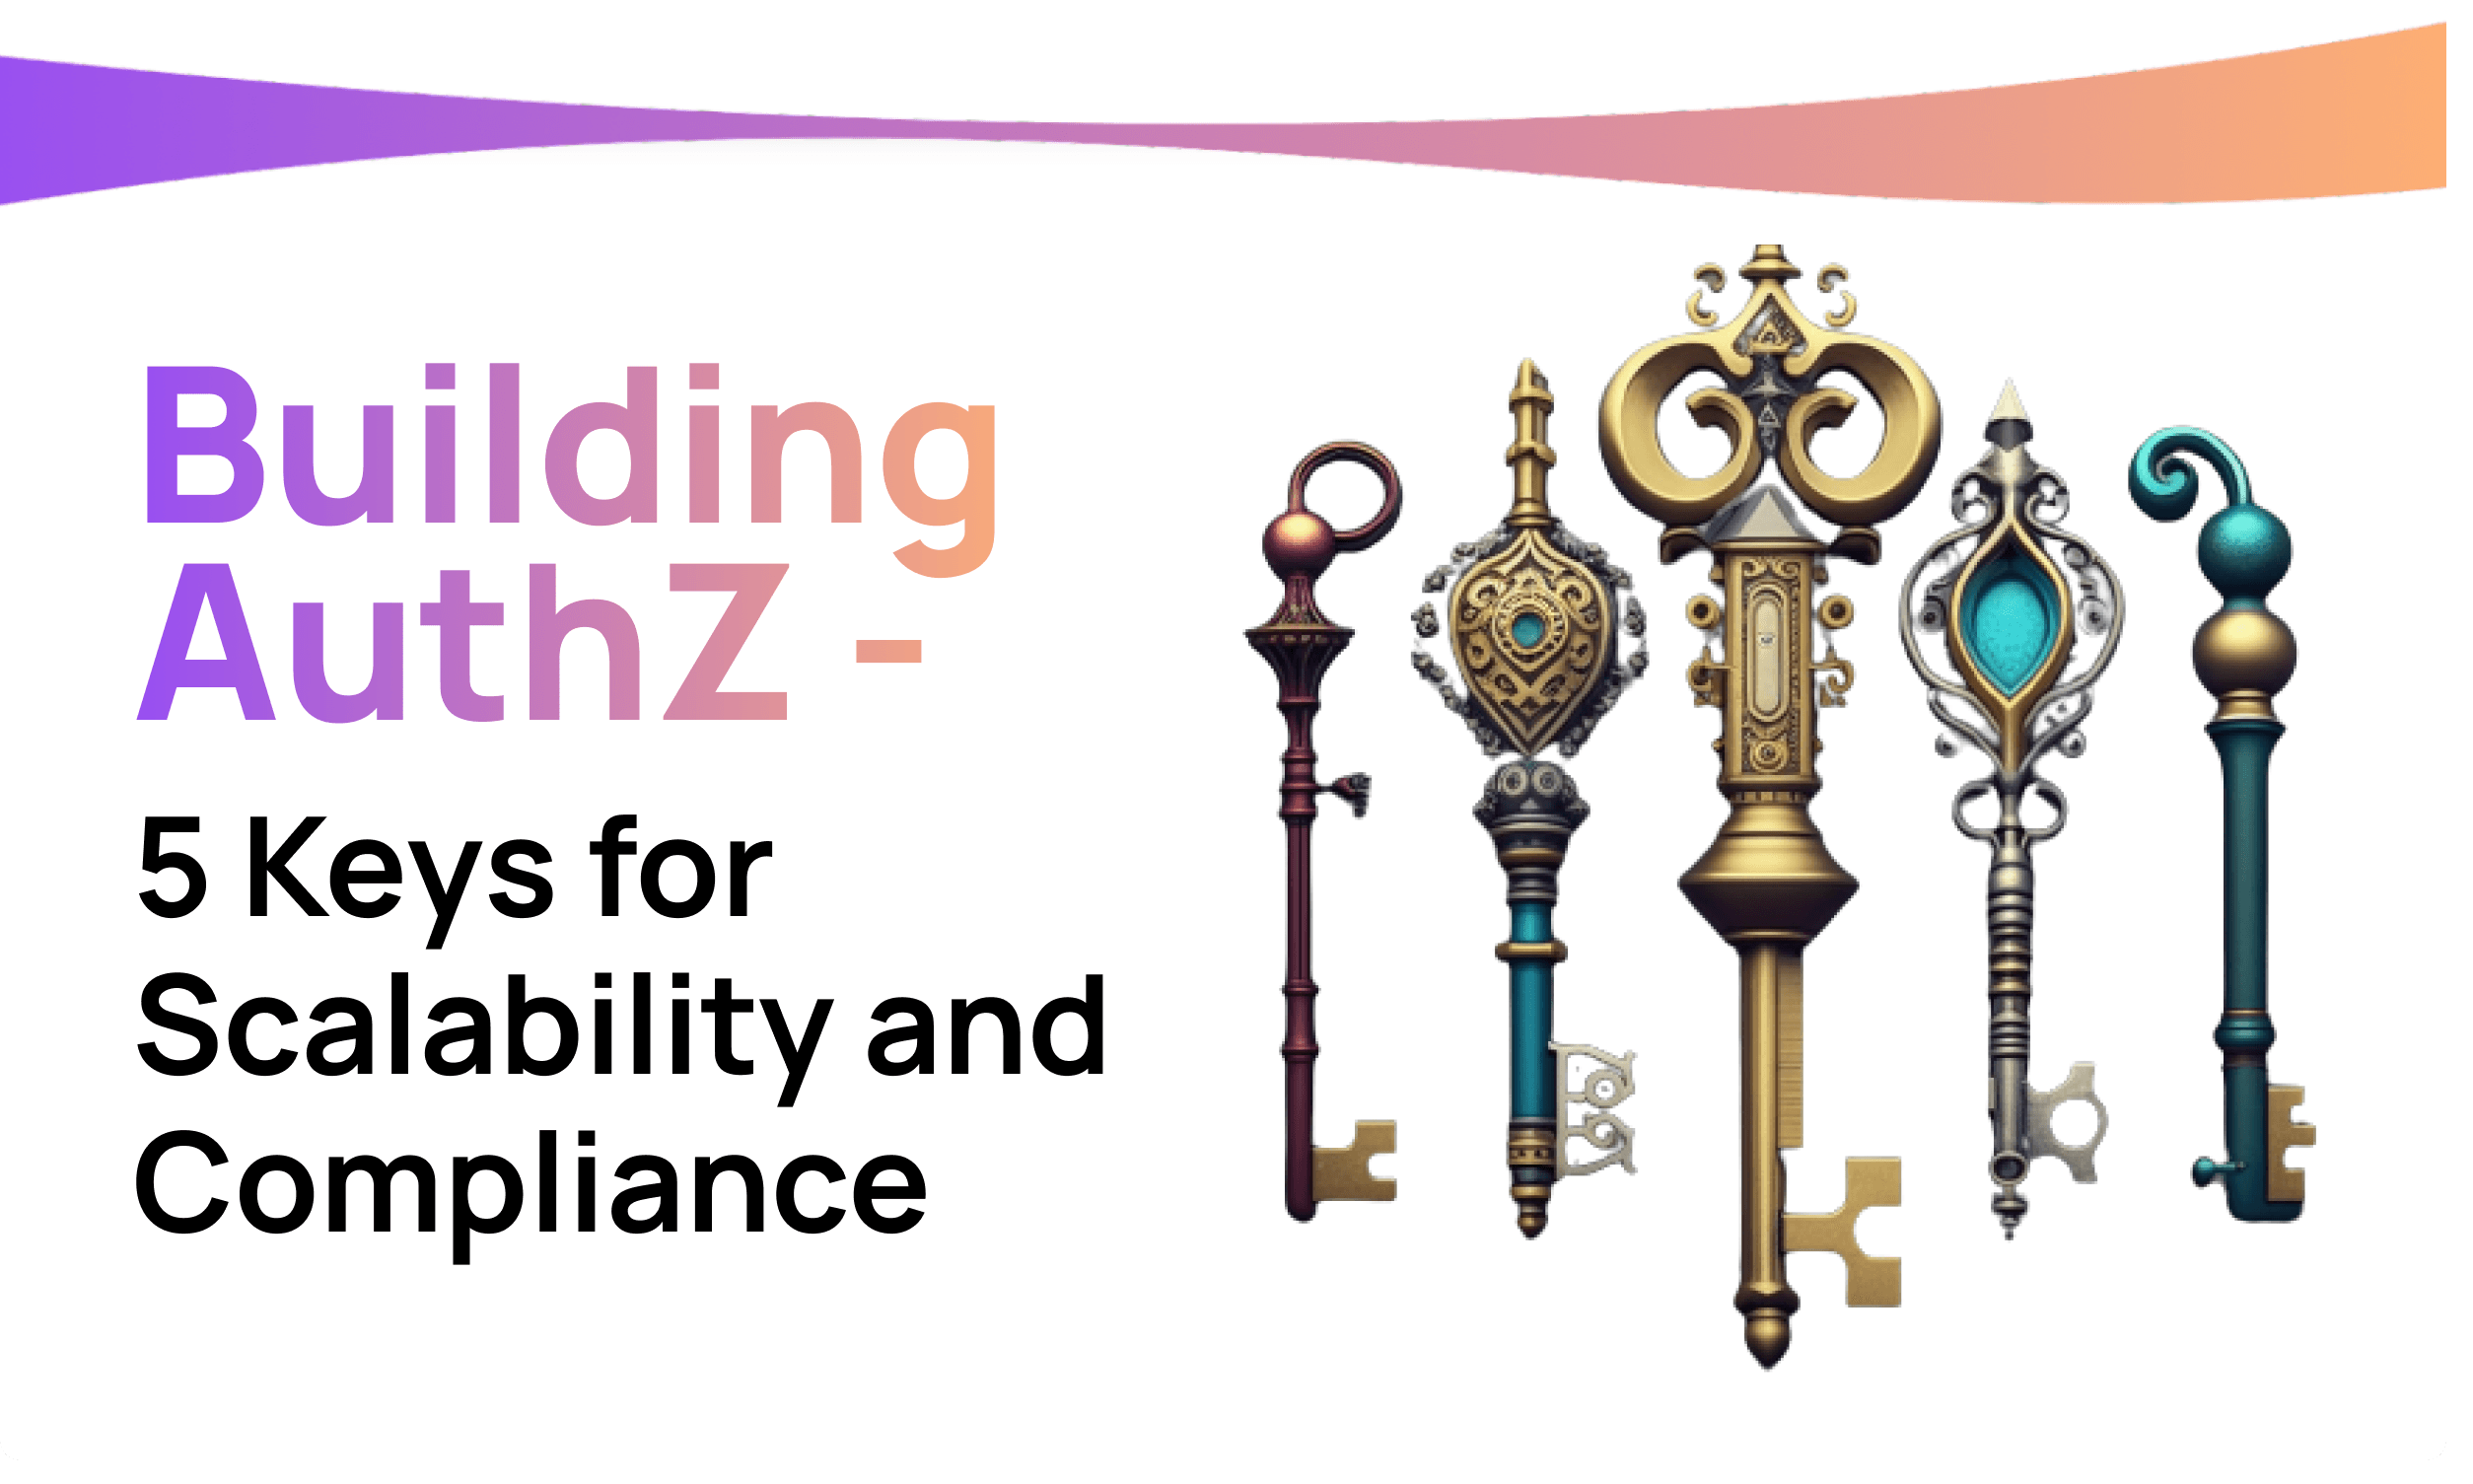 Building App Authorization: The 5 Keys for Scalability and Compliance